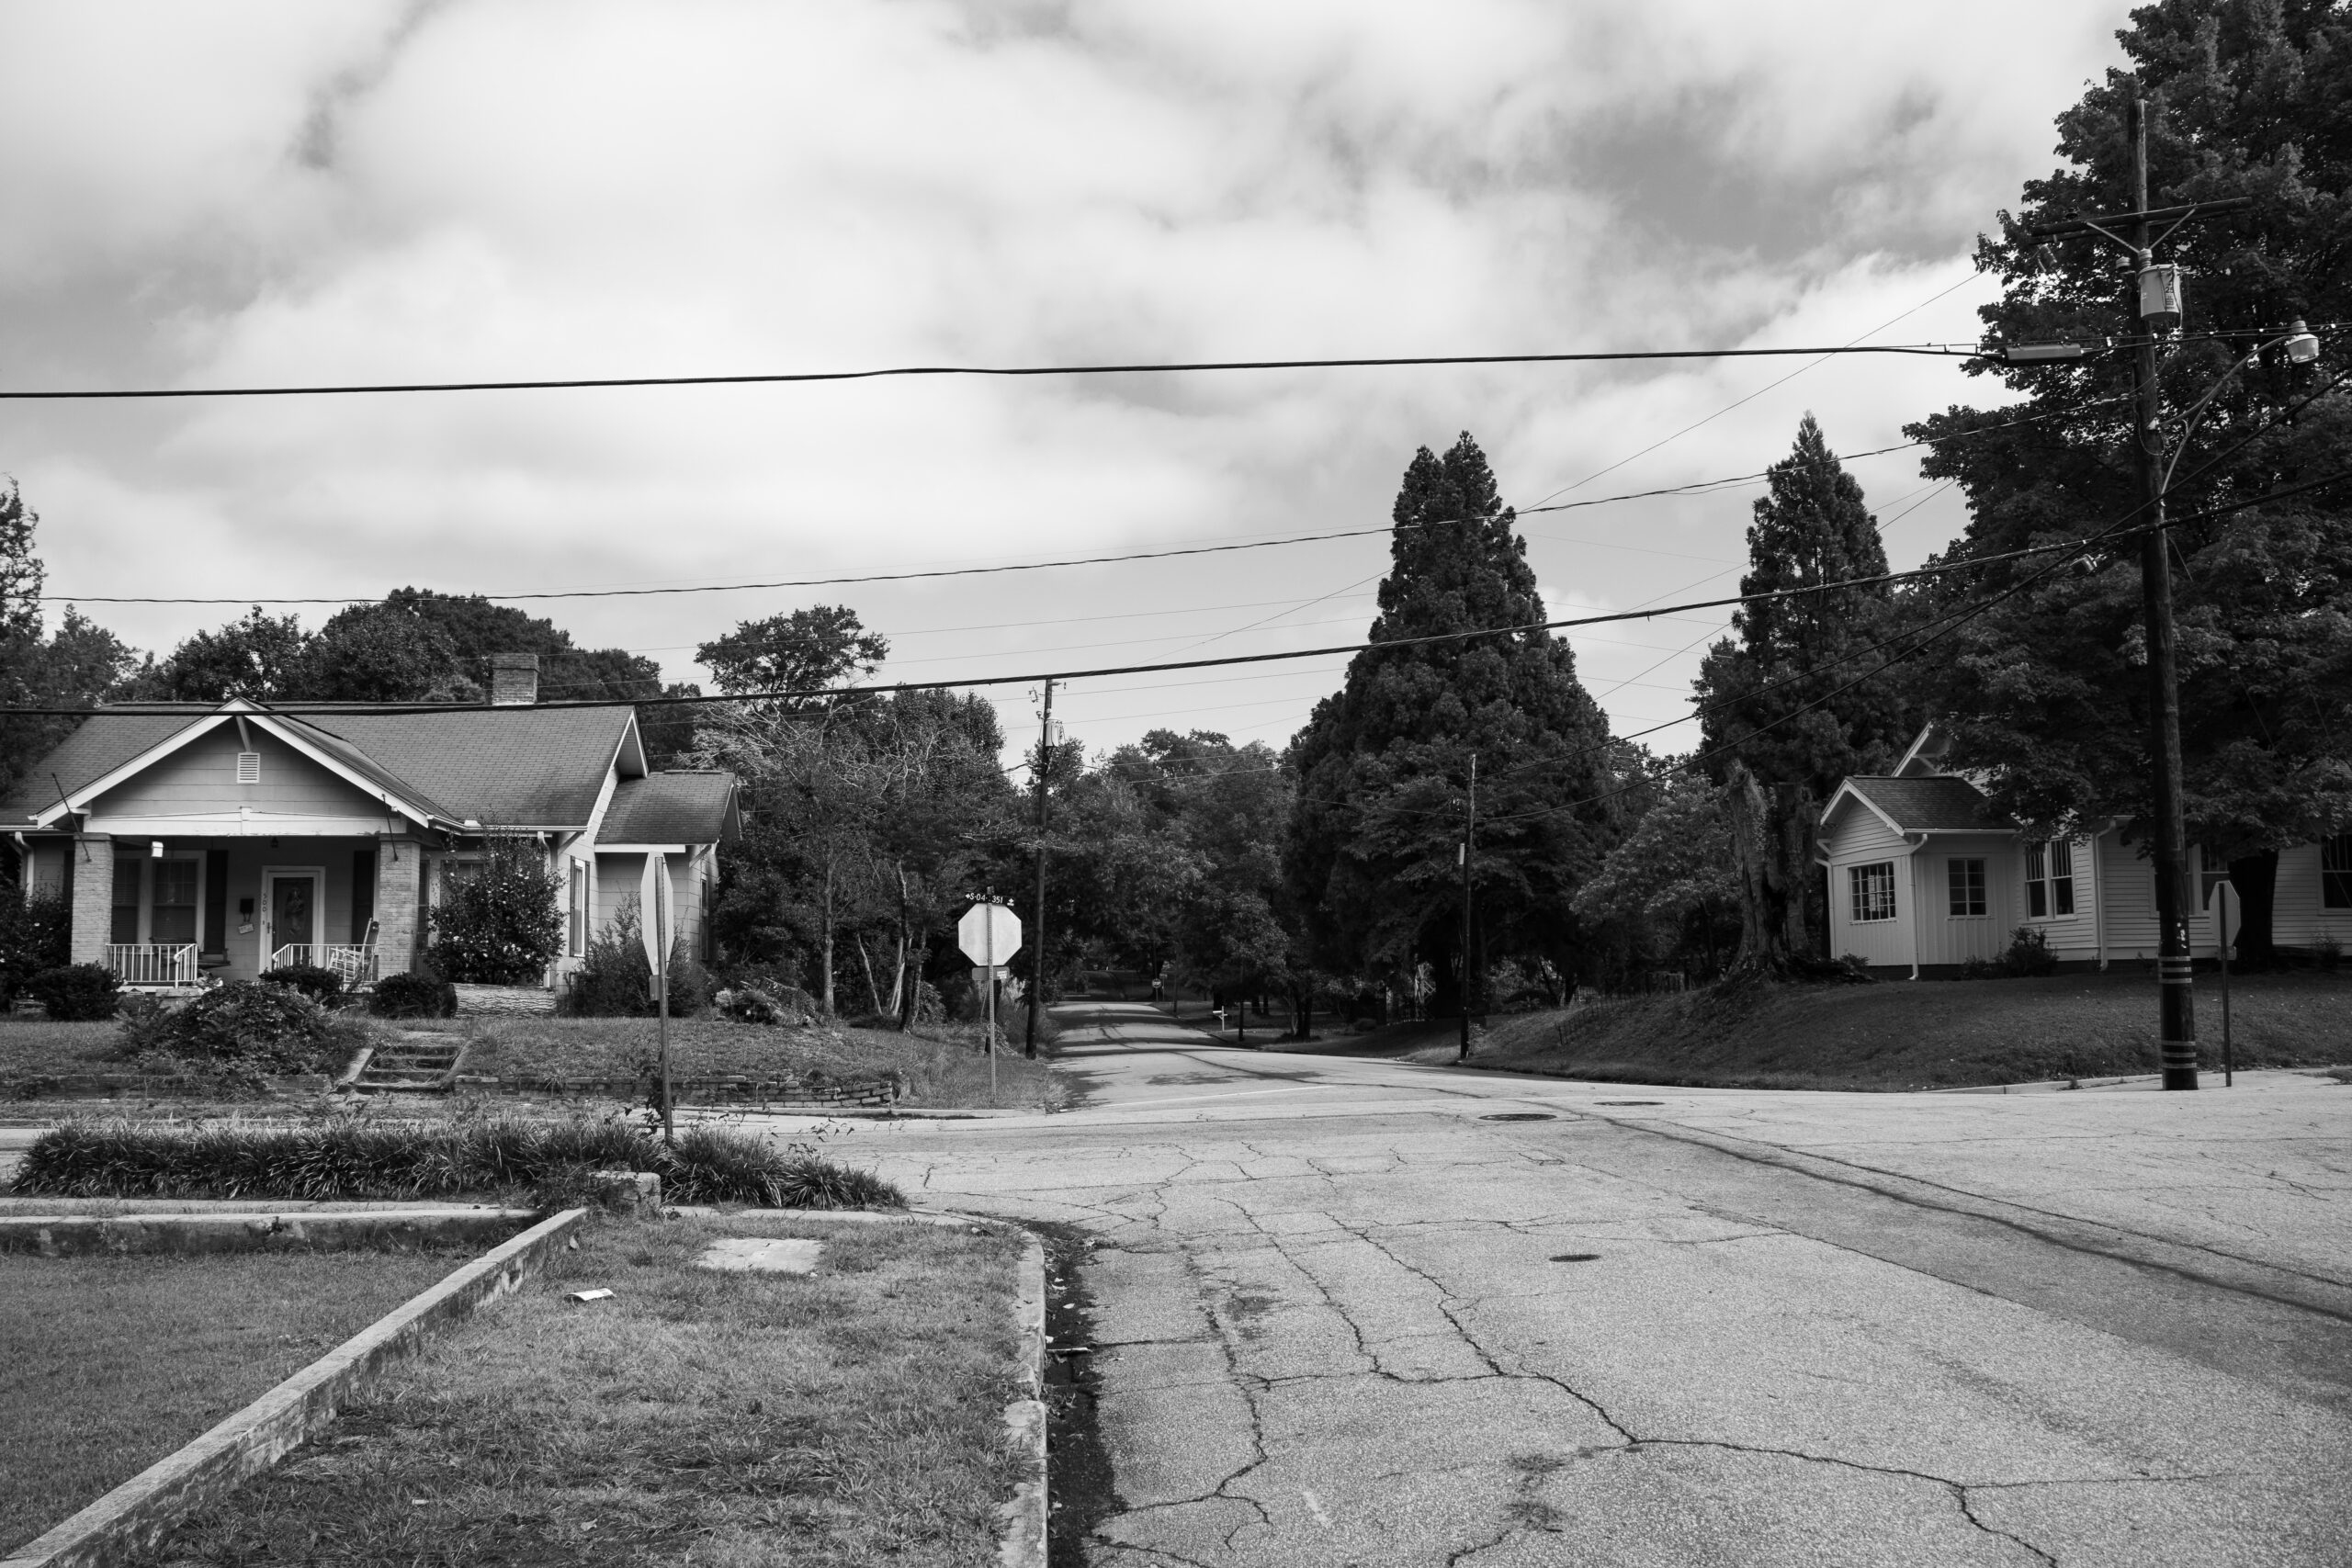 A black and white image of a middle-income neighborhood.